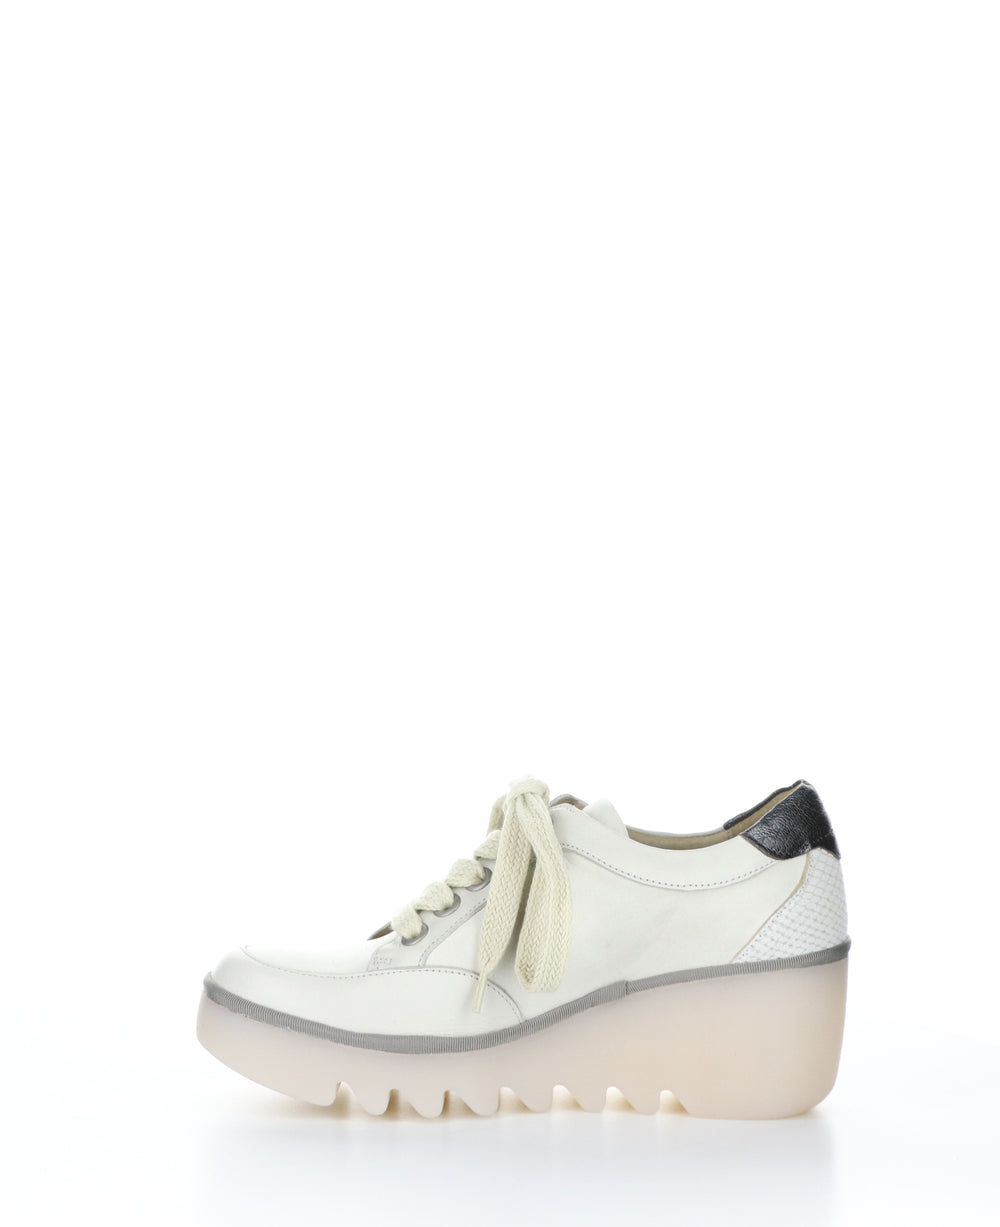 BINO347FLY Off White/Graph Round Toe Shoes